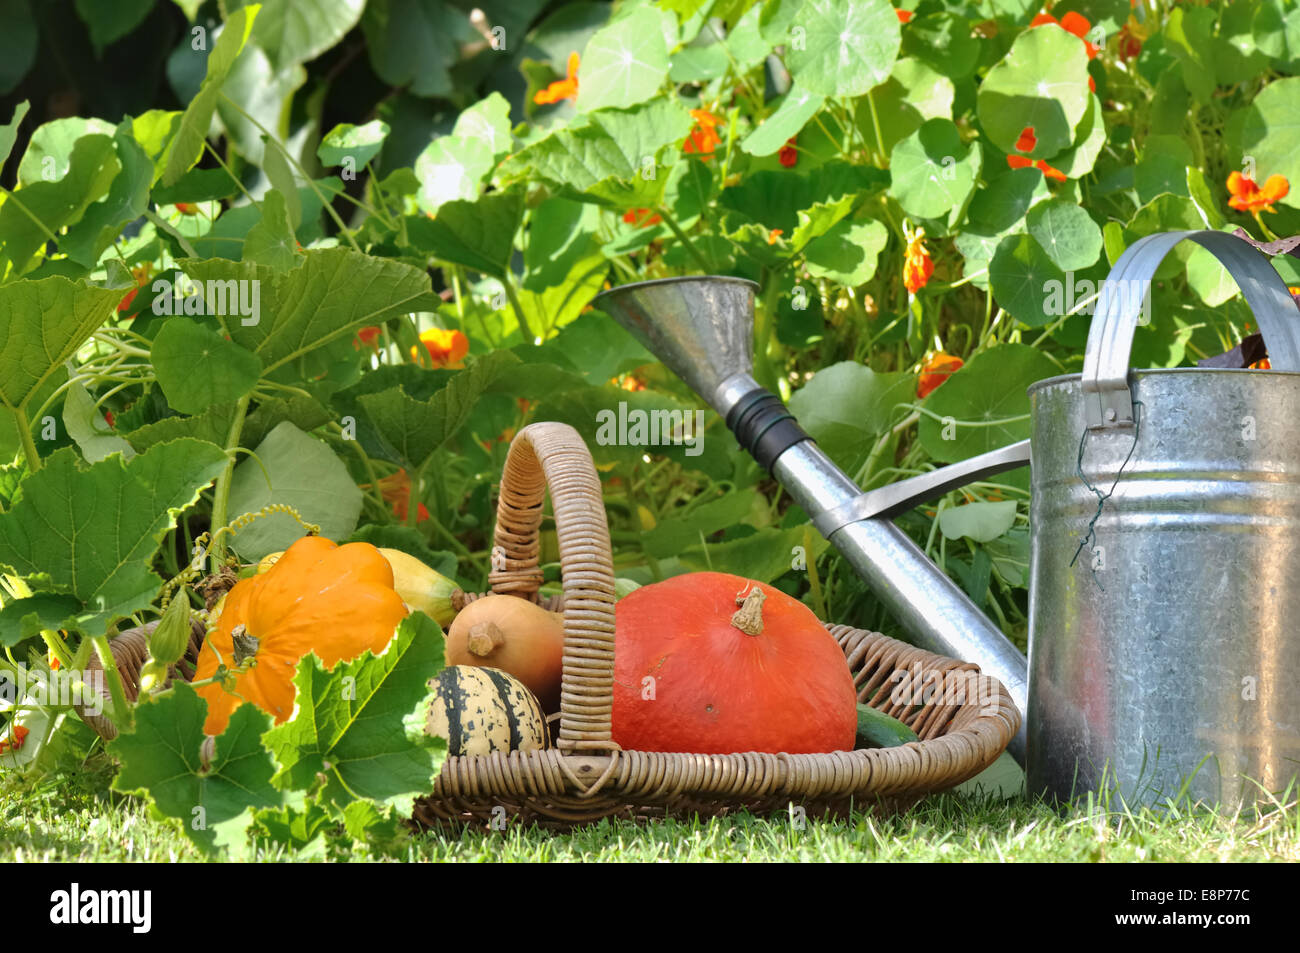 squashes in a basket with watering can in garden Stock Photo